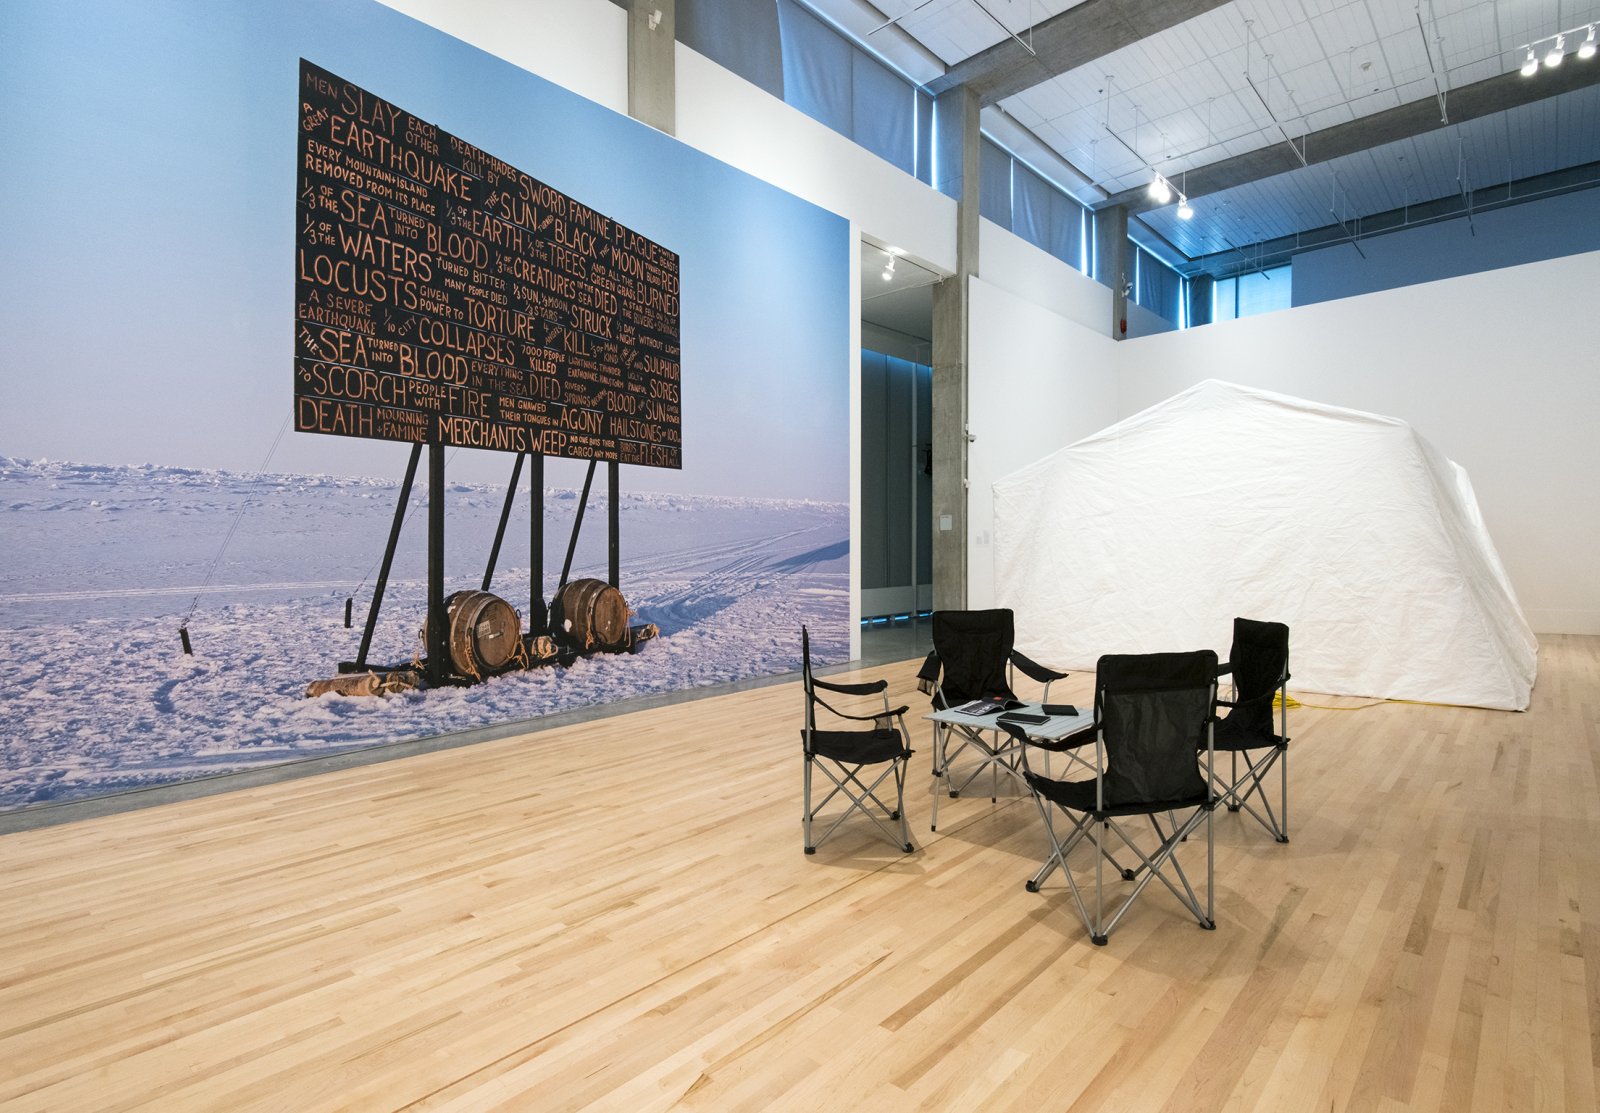 Kevin Schmidt, A Sign in the Northwest Passage (Billboard Mural), 2011, digital photo, dimensions variable. Installation view, The Commons, Kamloops Art Gallery, Kamloops, Canada, 2015